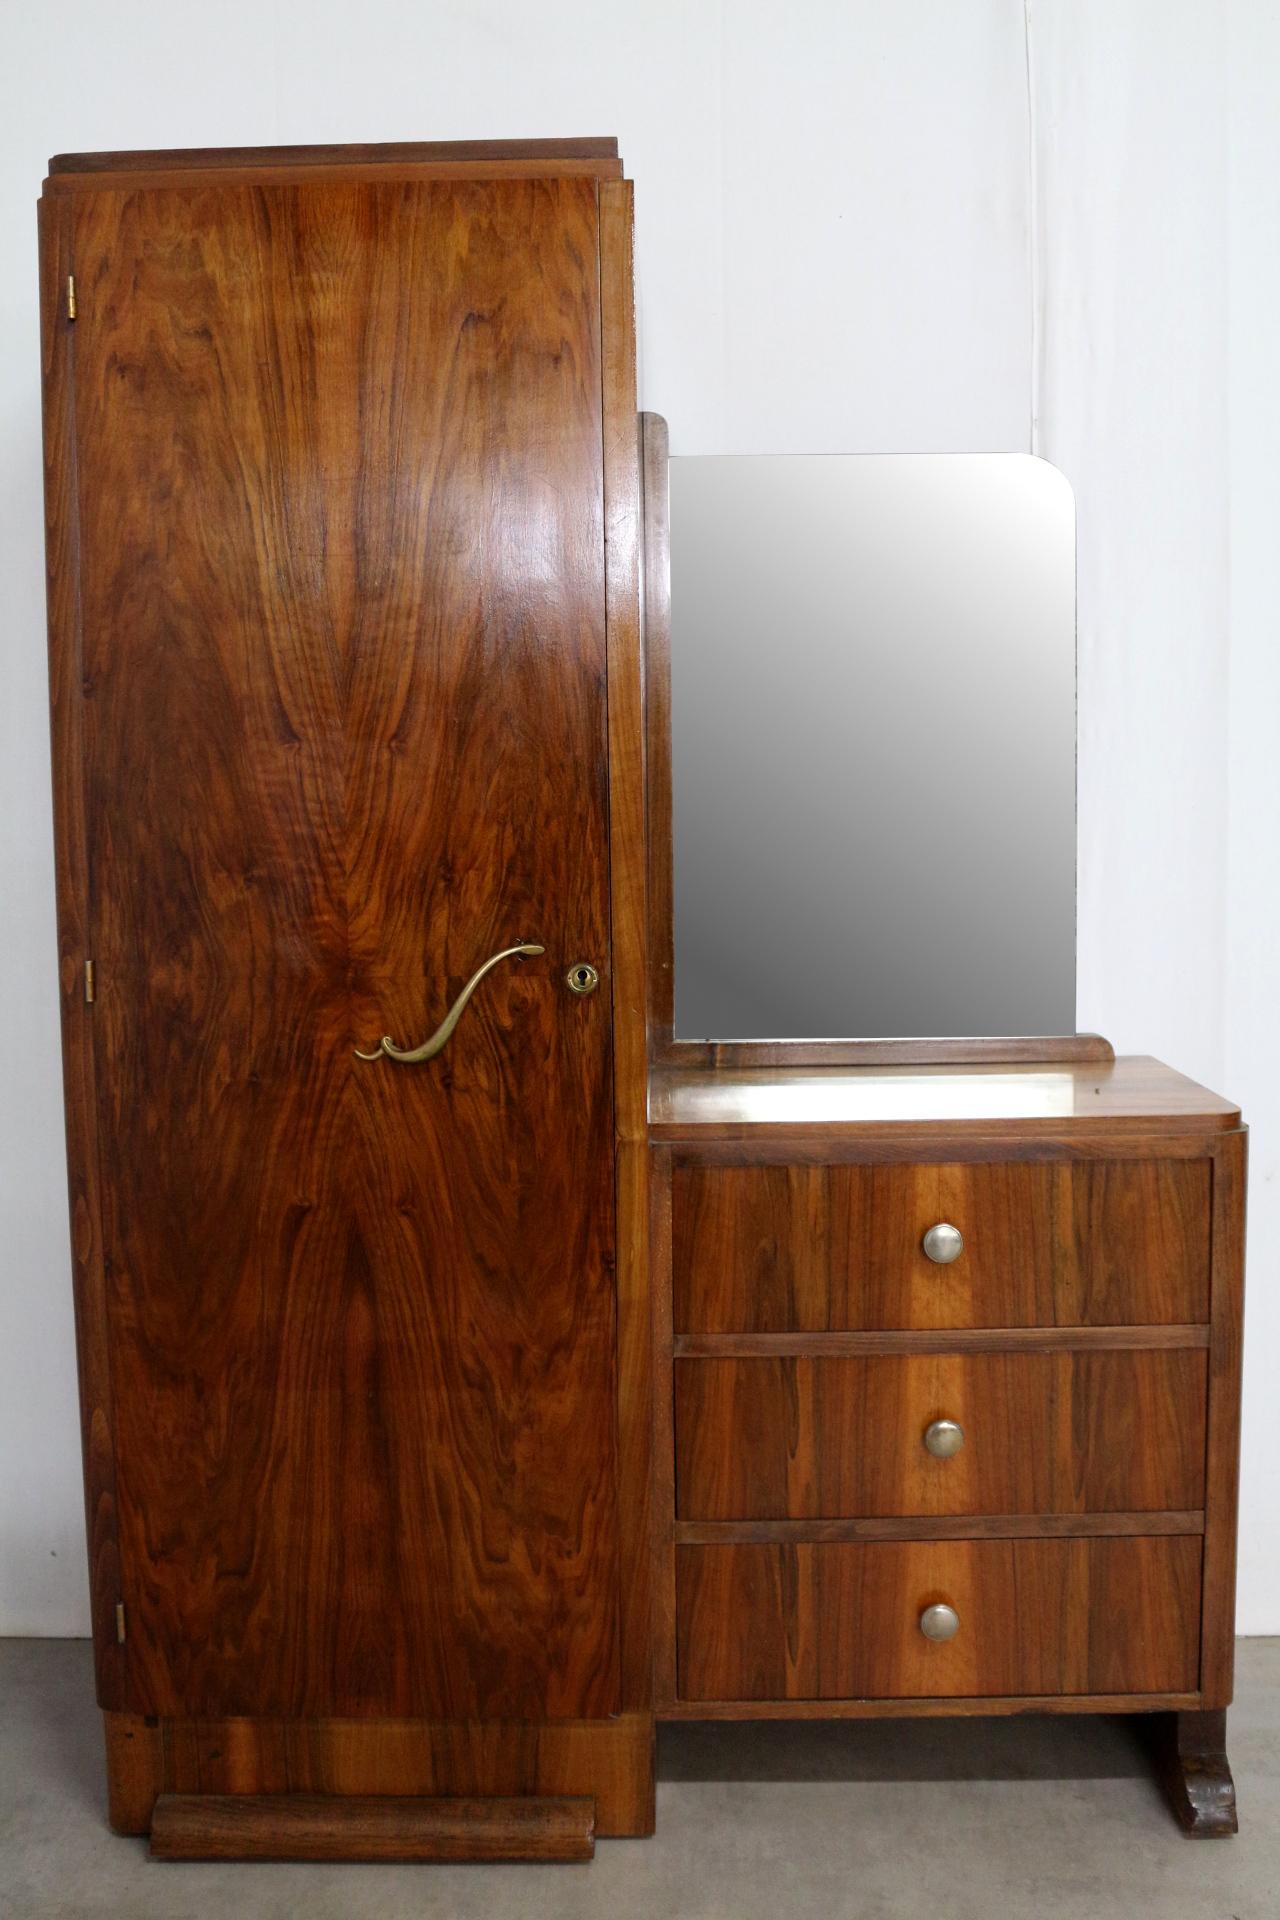 Art Deco wardrobe compactum dressing chest vanity unit mirror walnut
Quartered and figured walnut door
Useful and practical
Original mirror
Very good vintage condition with minor signs of age and use.